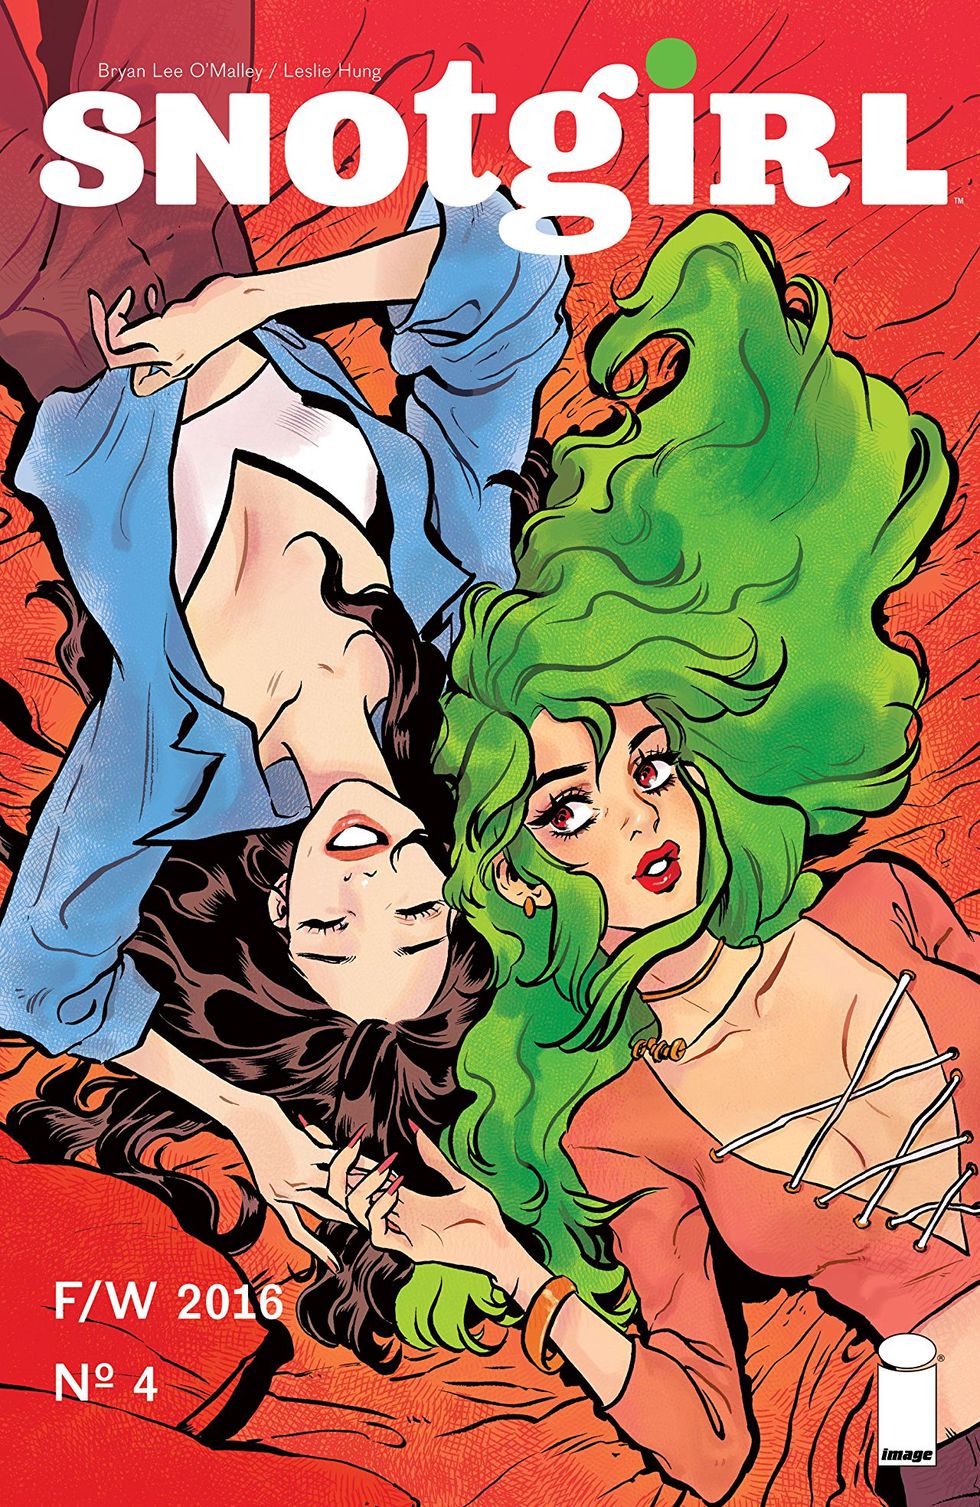 Why You Should Read 'Snotgirl' By Brian Lee O'Malley and Leslie Hung